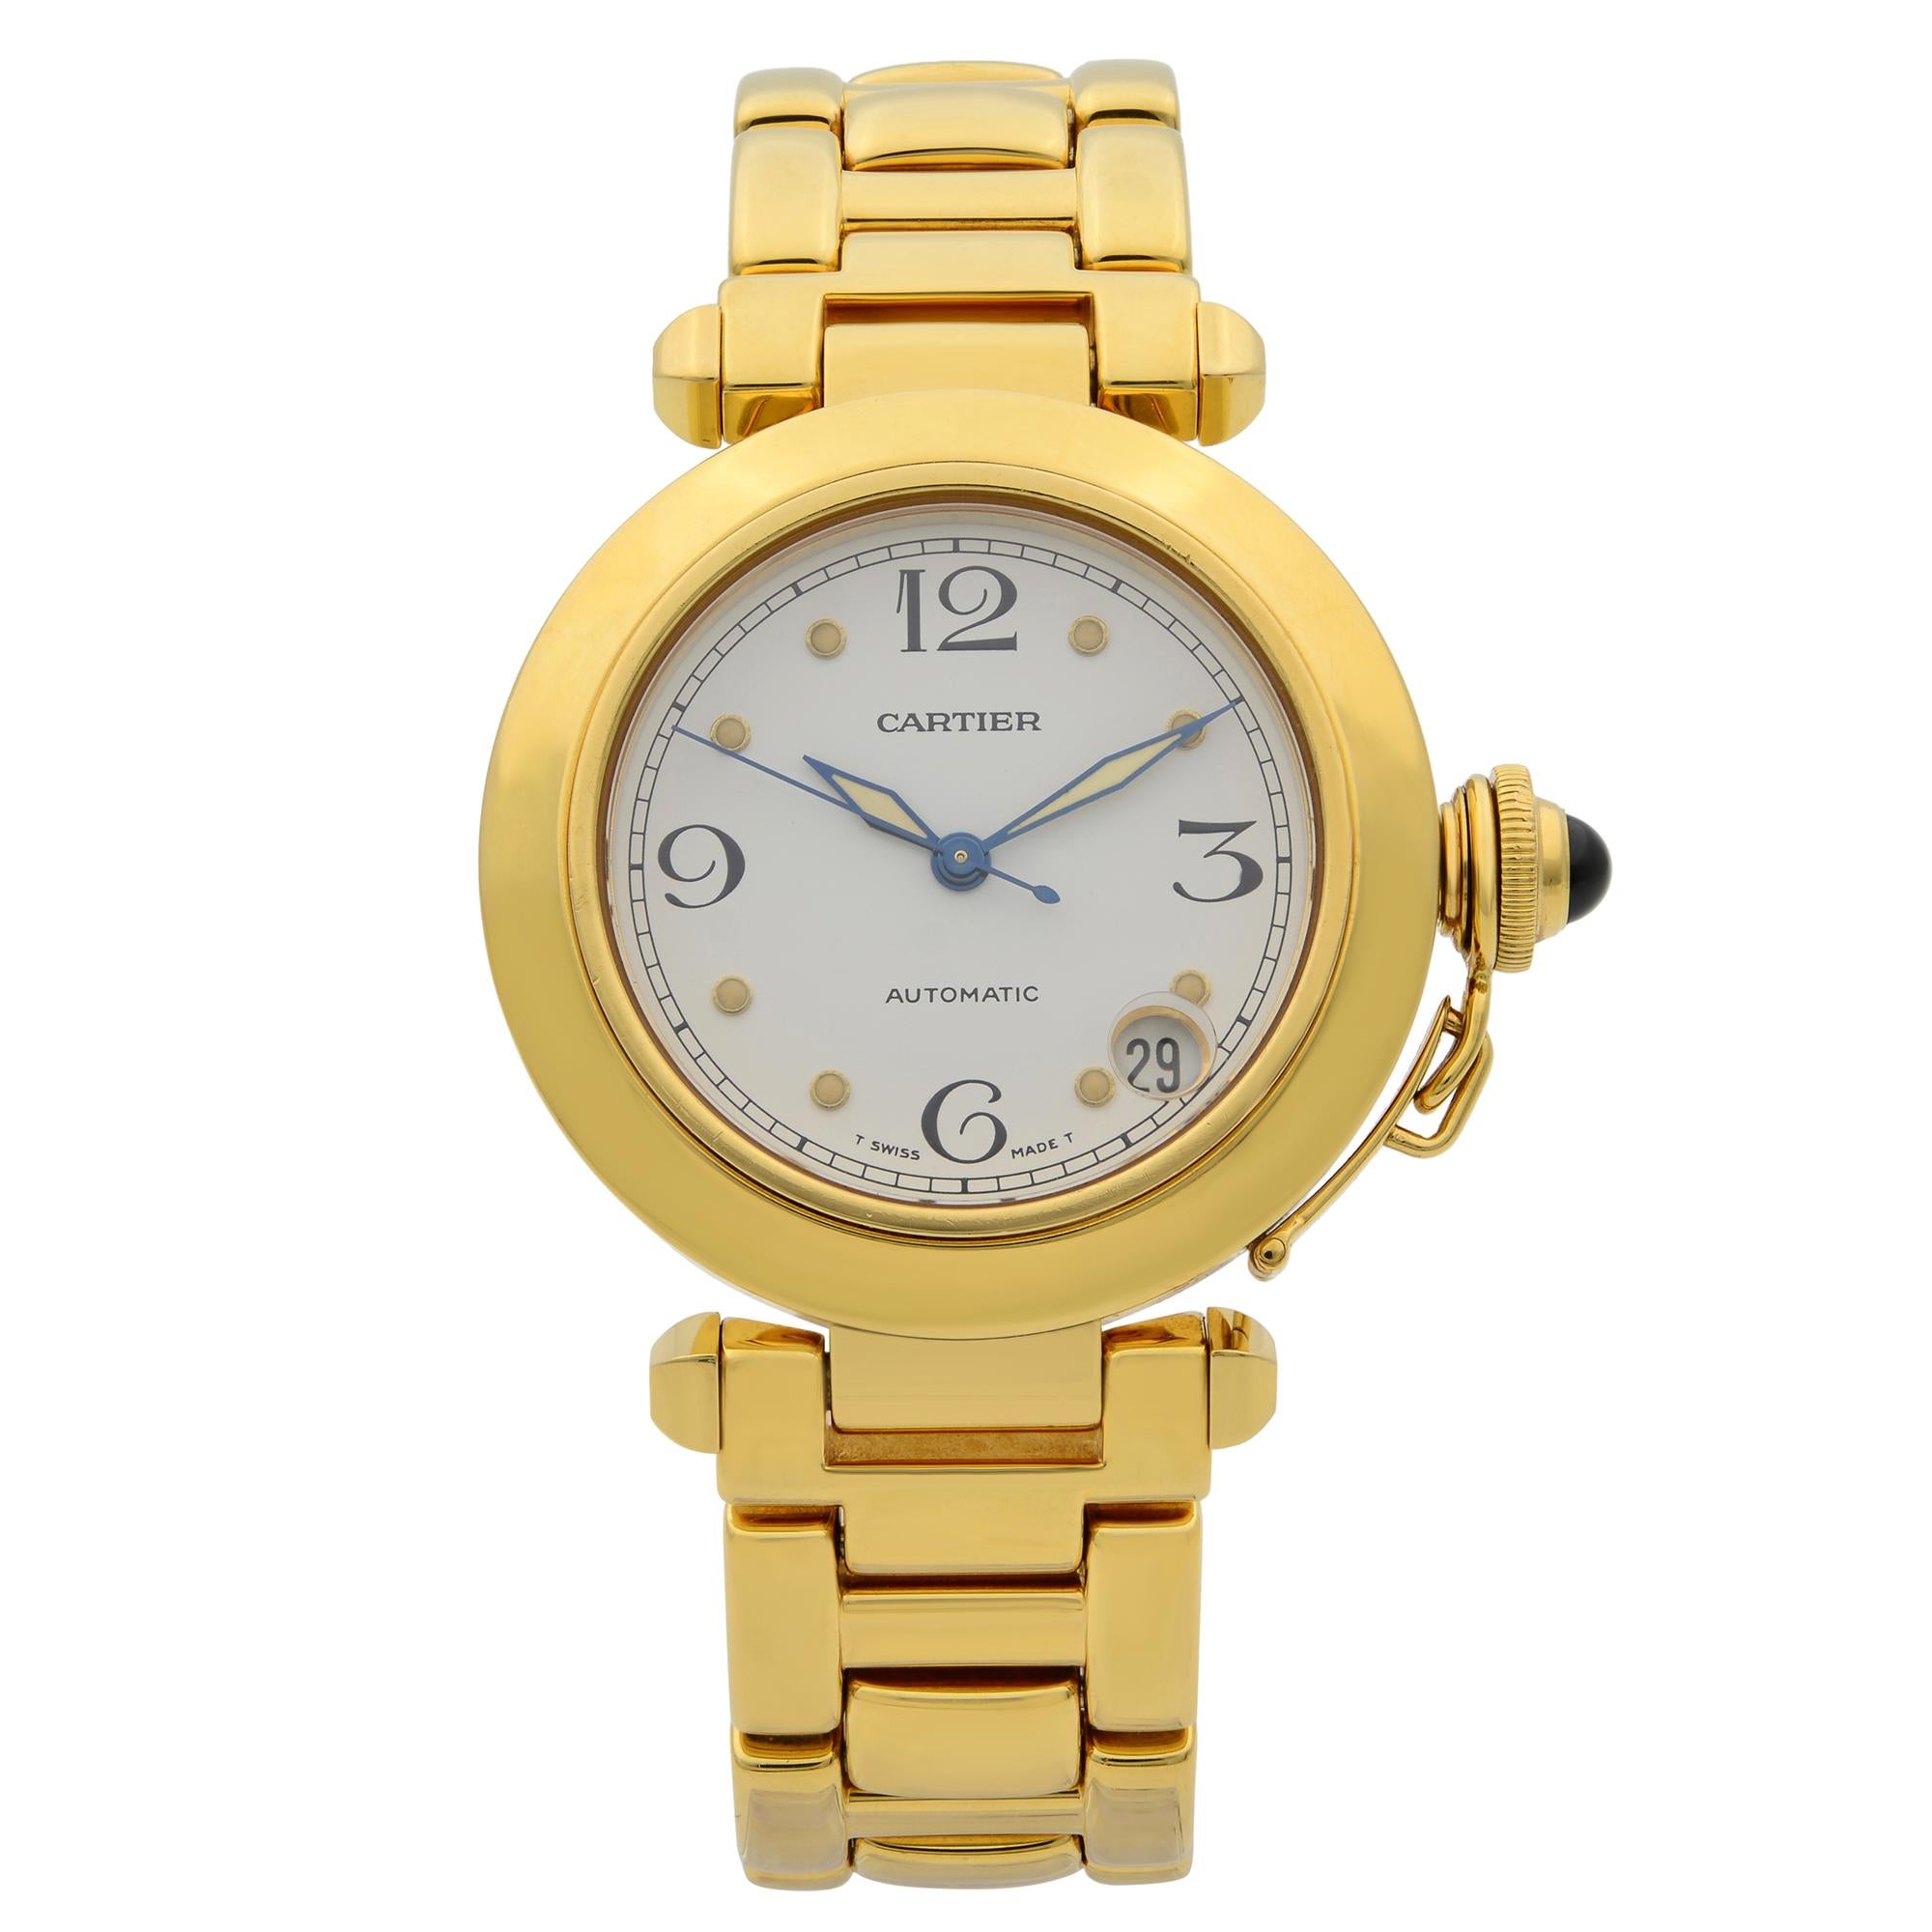 This pre-owned Cartier Pasha  WJ1110H9 is a beautiful Ladie's timepiece that is powered by mechanical (automatic) movement which is cased in a yellow gold case. It has a round shape face, date indicator dial and has hand arabic numerals, dots style